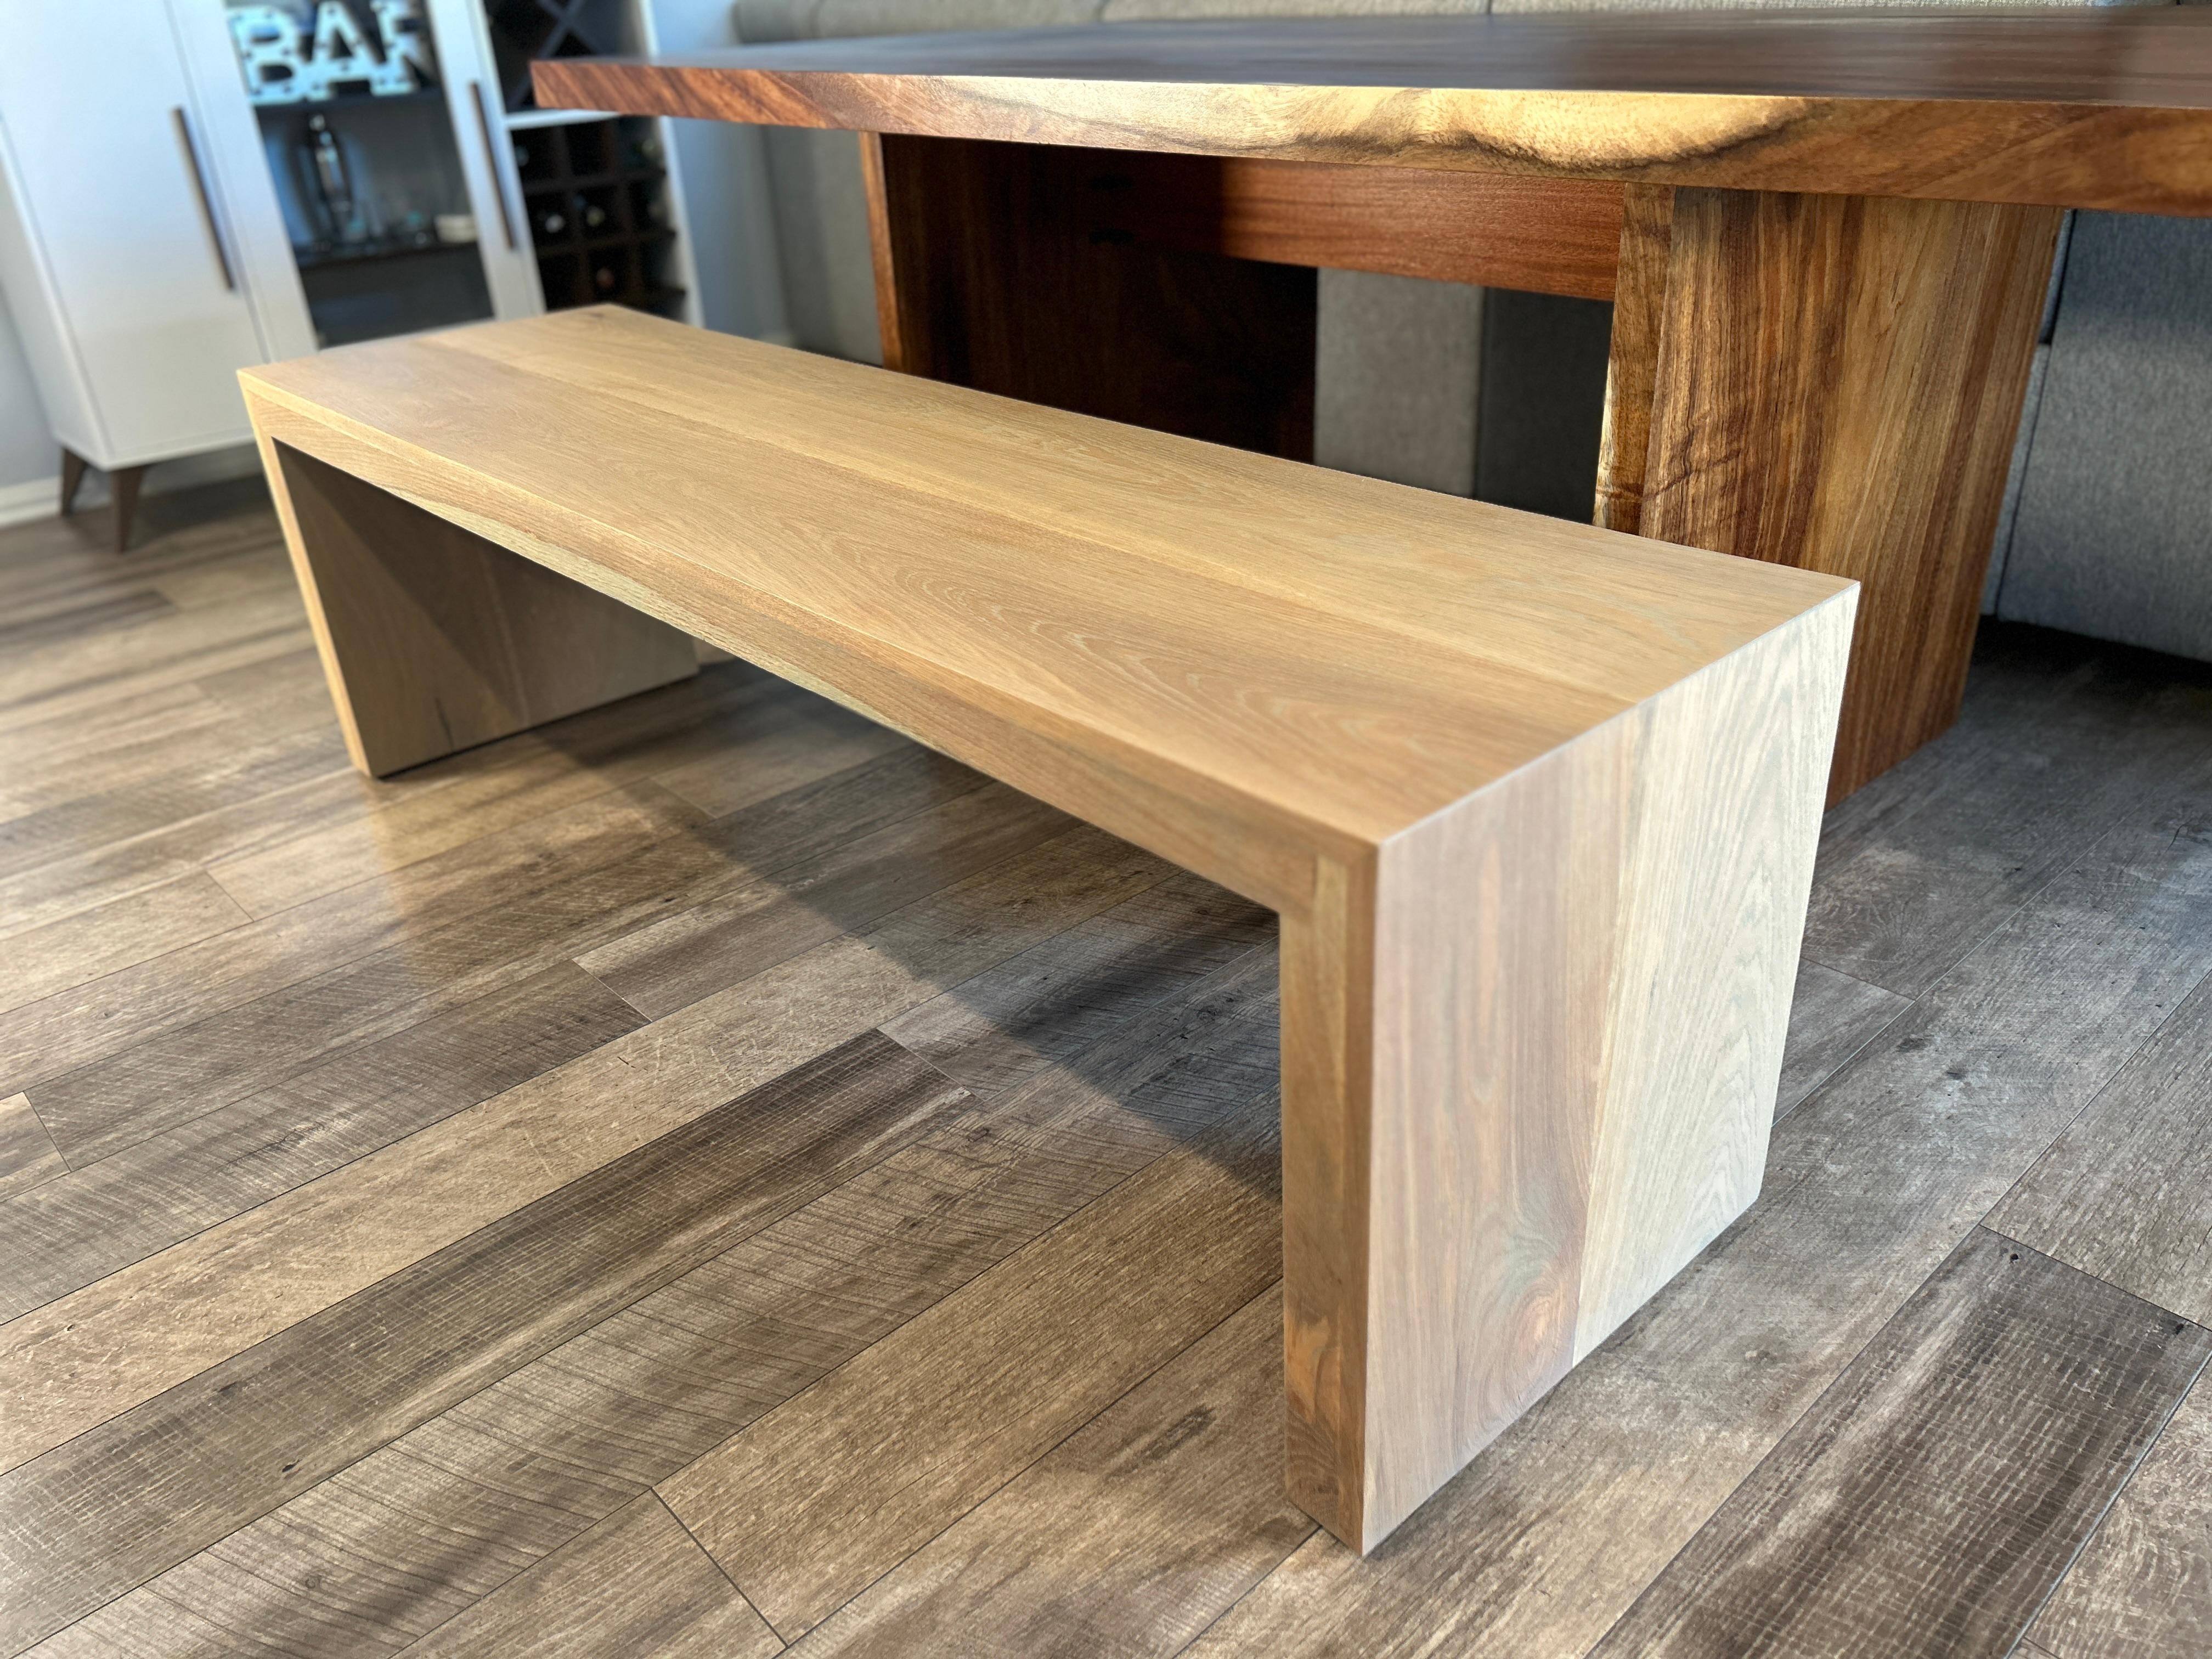 21st Century Minimalist White Oak Dining, Entry Seating Bench  In New Condition For Sale In Oakhurst, NJ